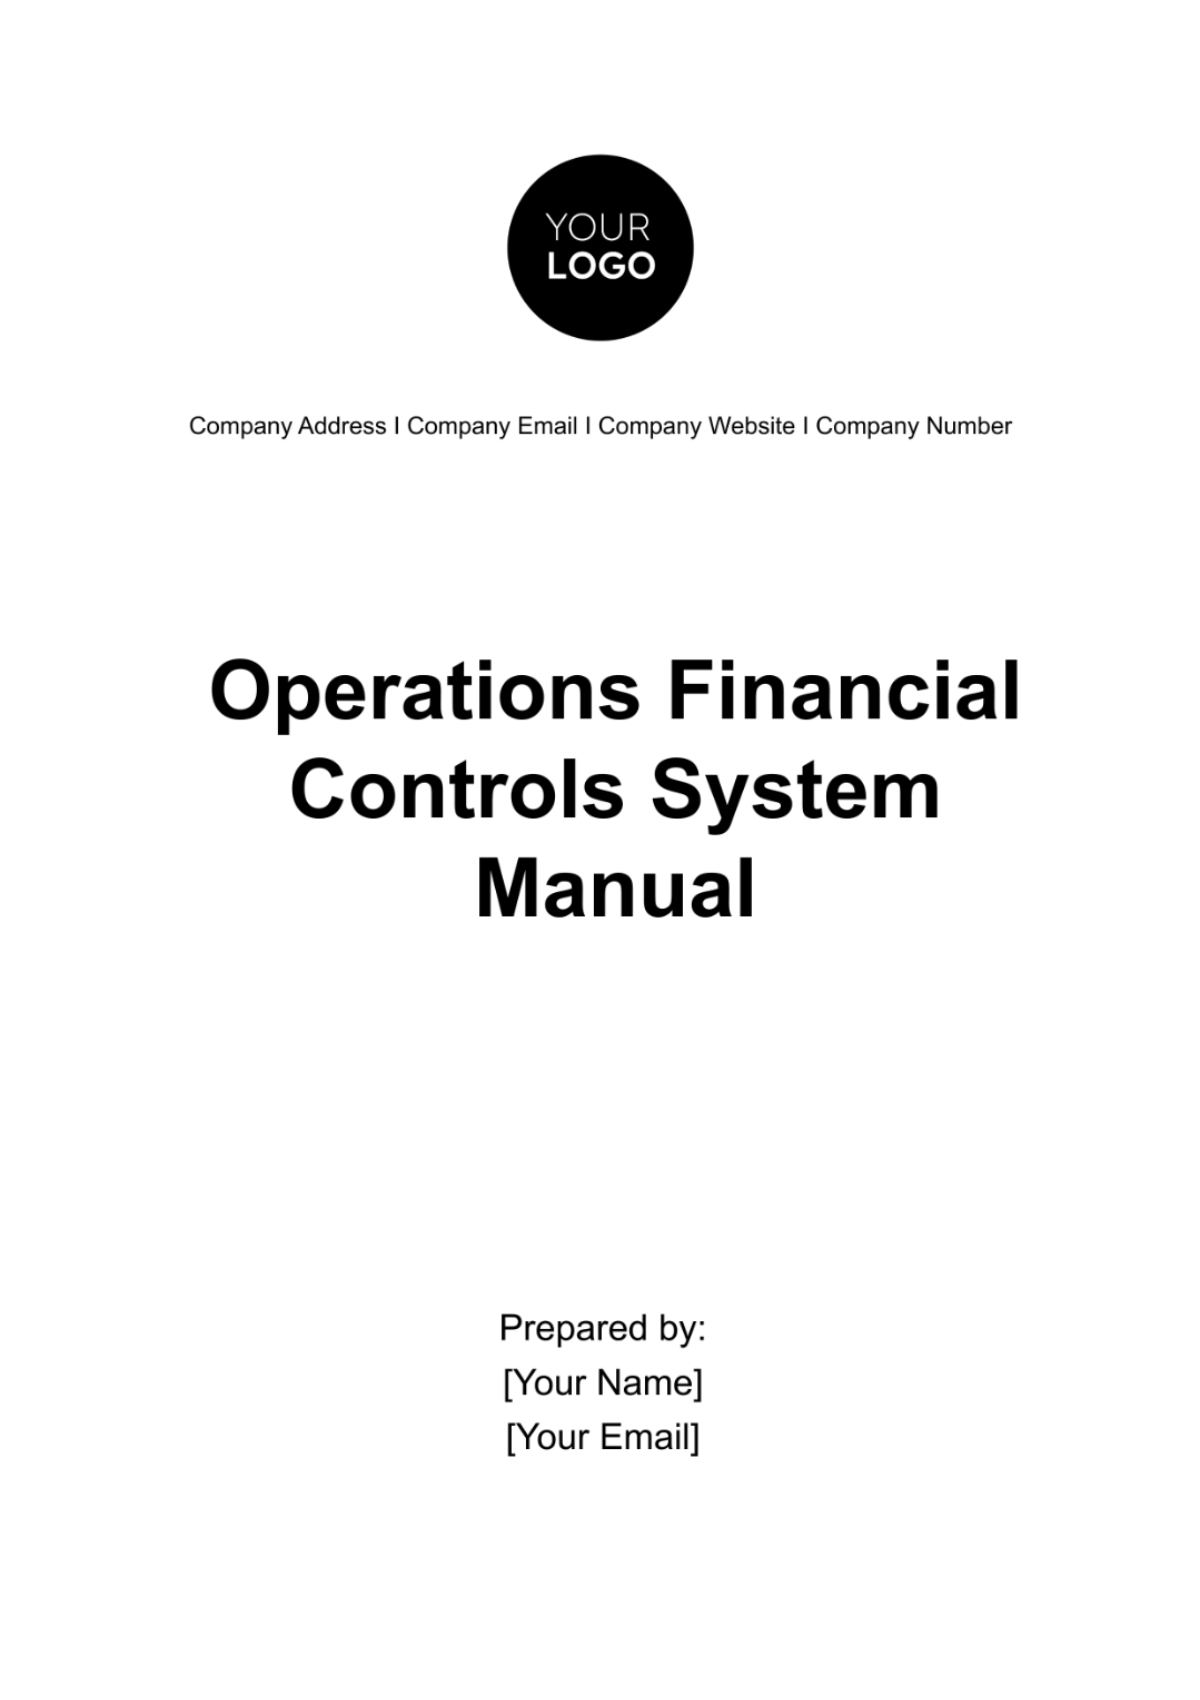 Operations Financial Controls System Manual Template